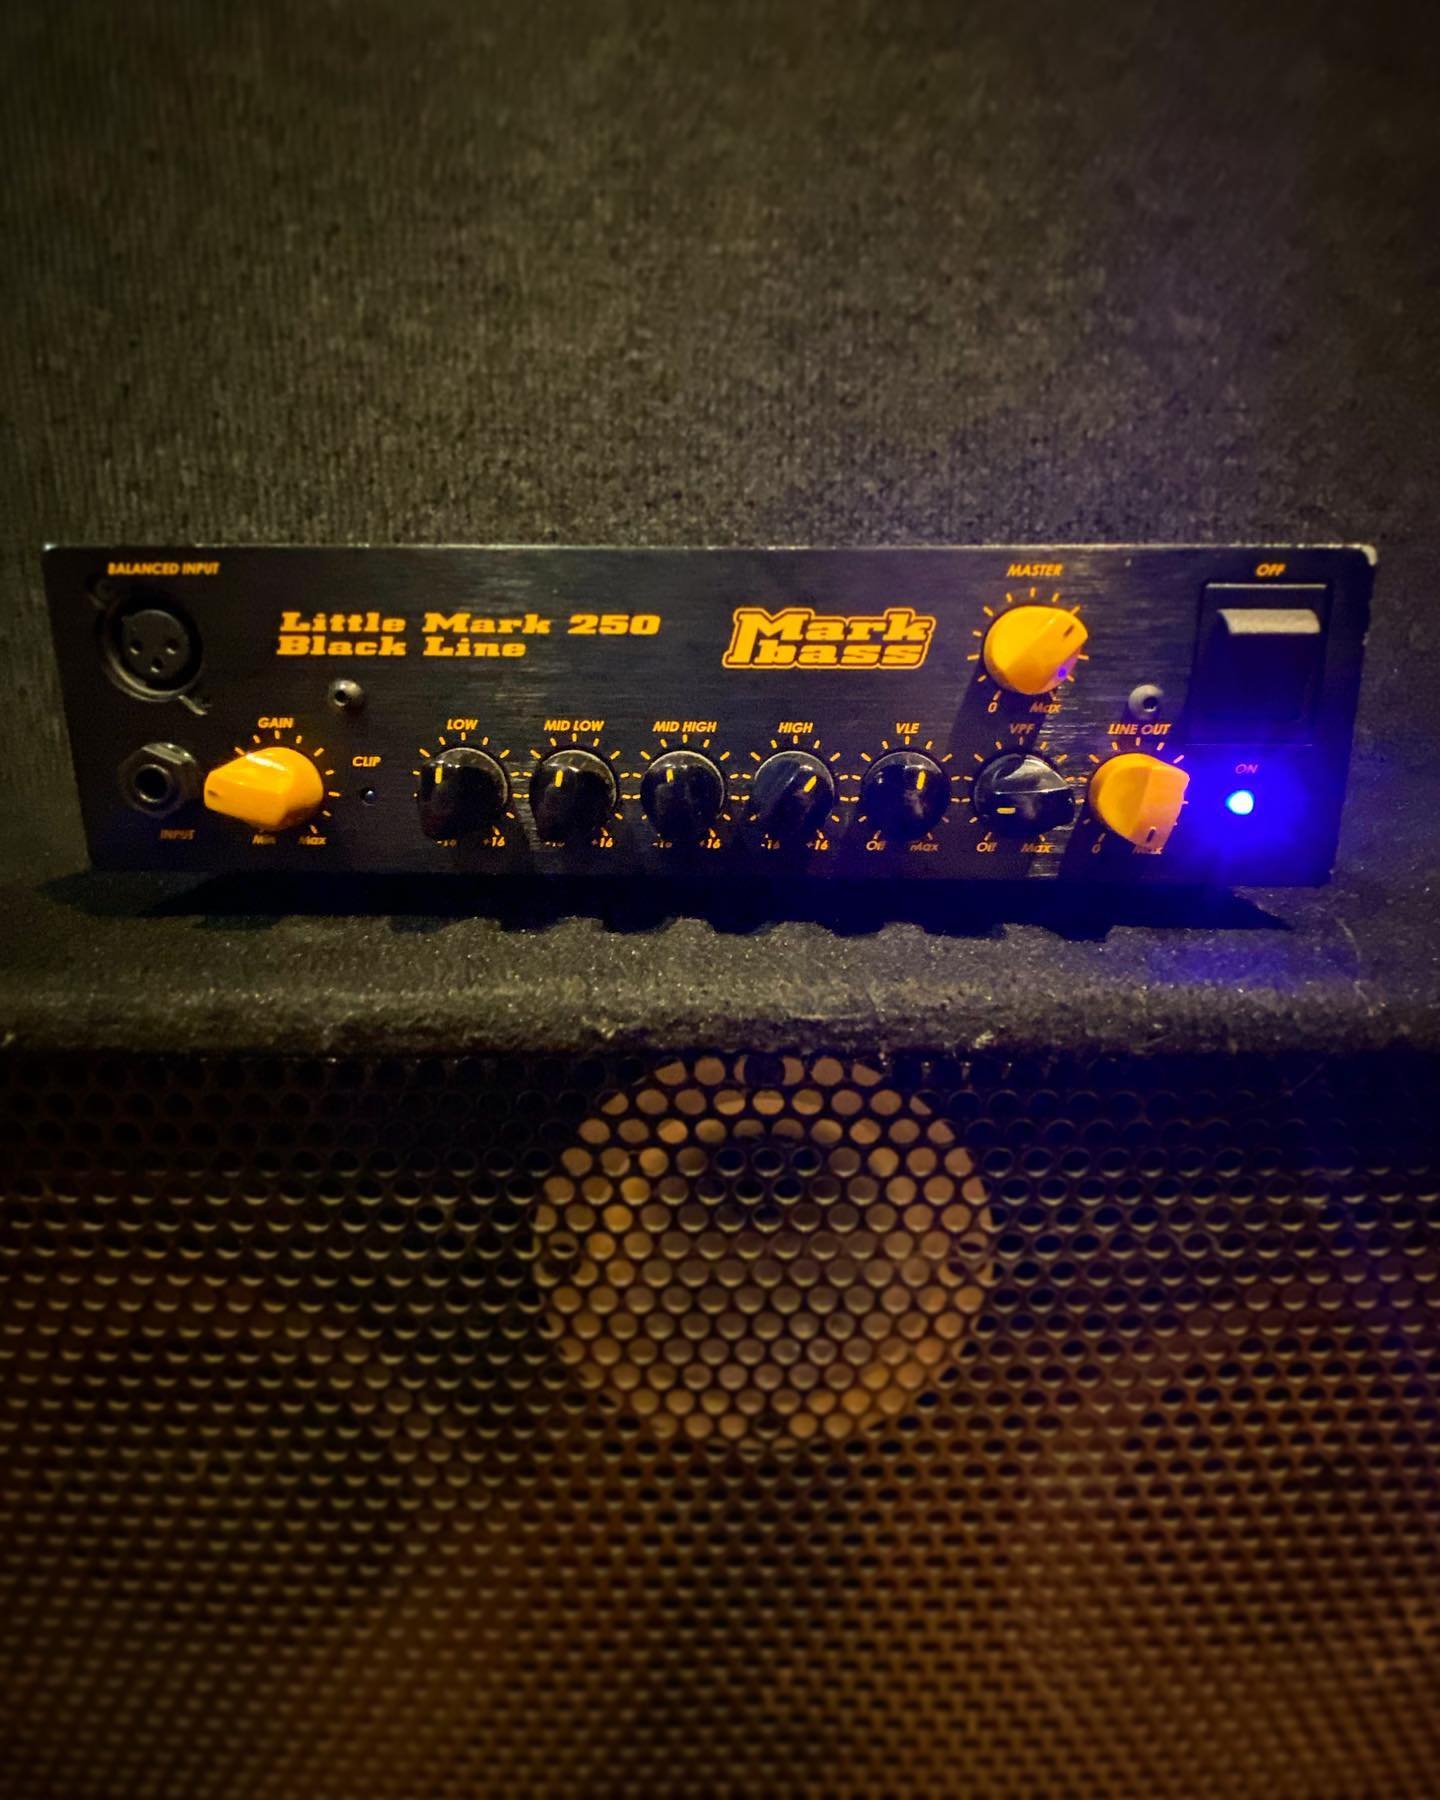 Bass players are unstoppable with this juicy Little Mark 250 amp head 🙌🎸

Treat your bass player for your next rehearsal - book a slot today! ❤️

Love, 
Monster Studios x